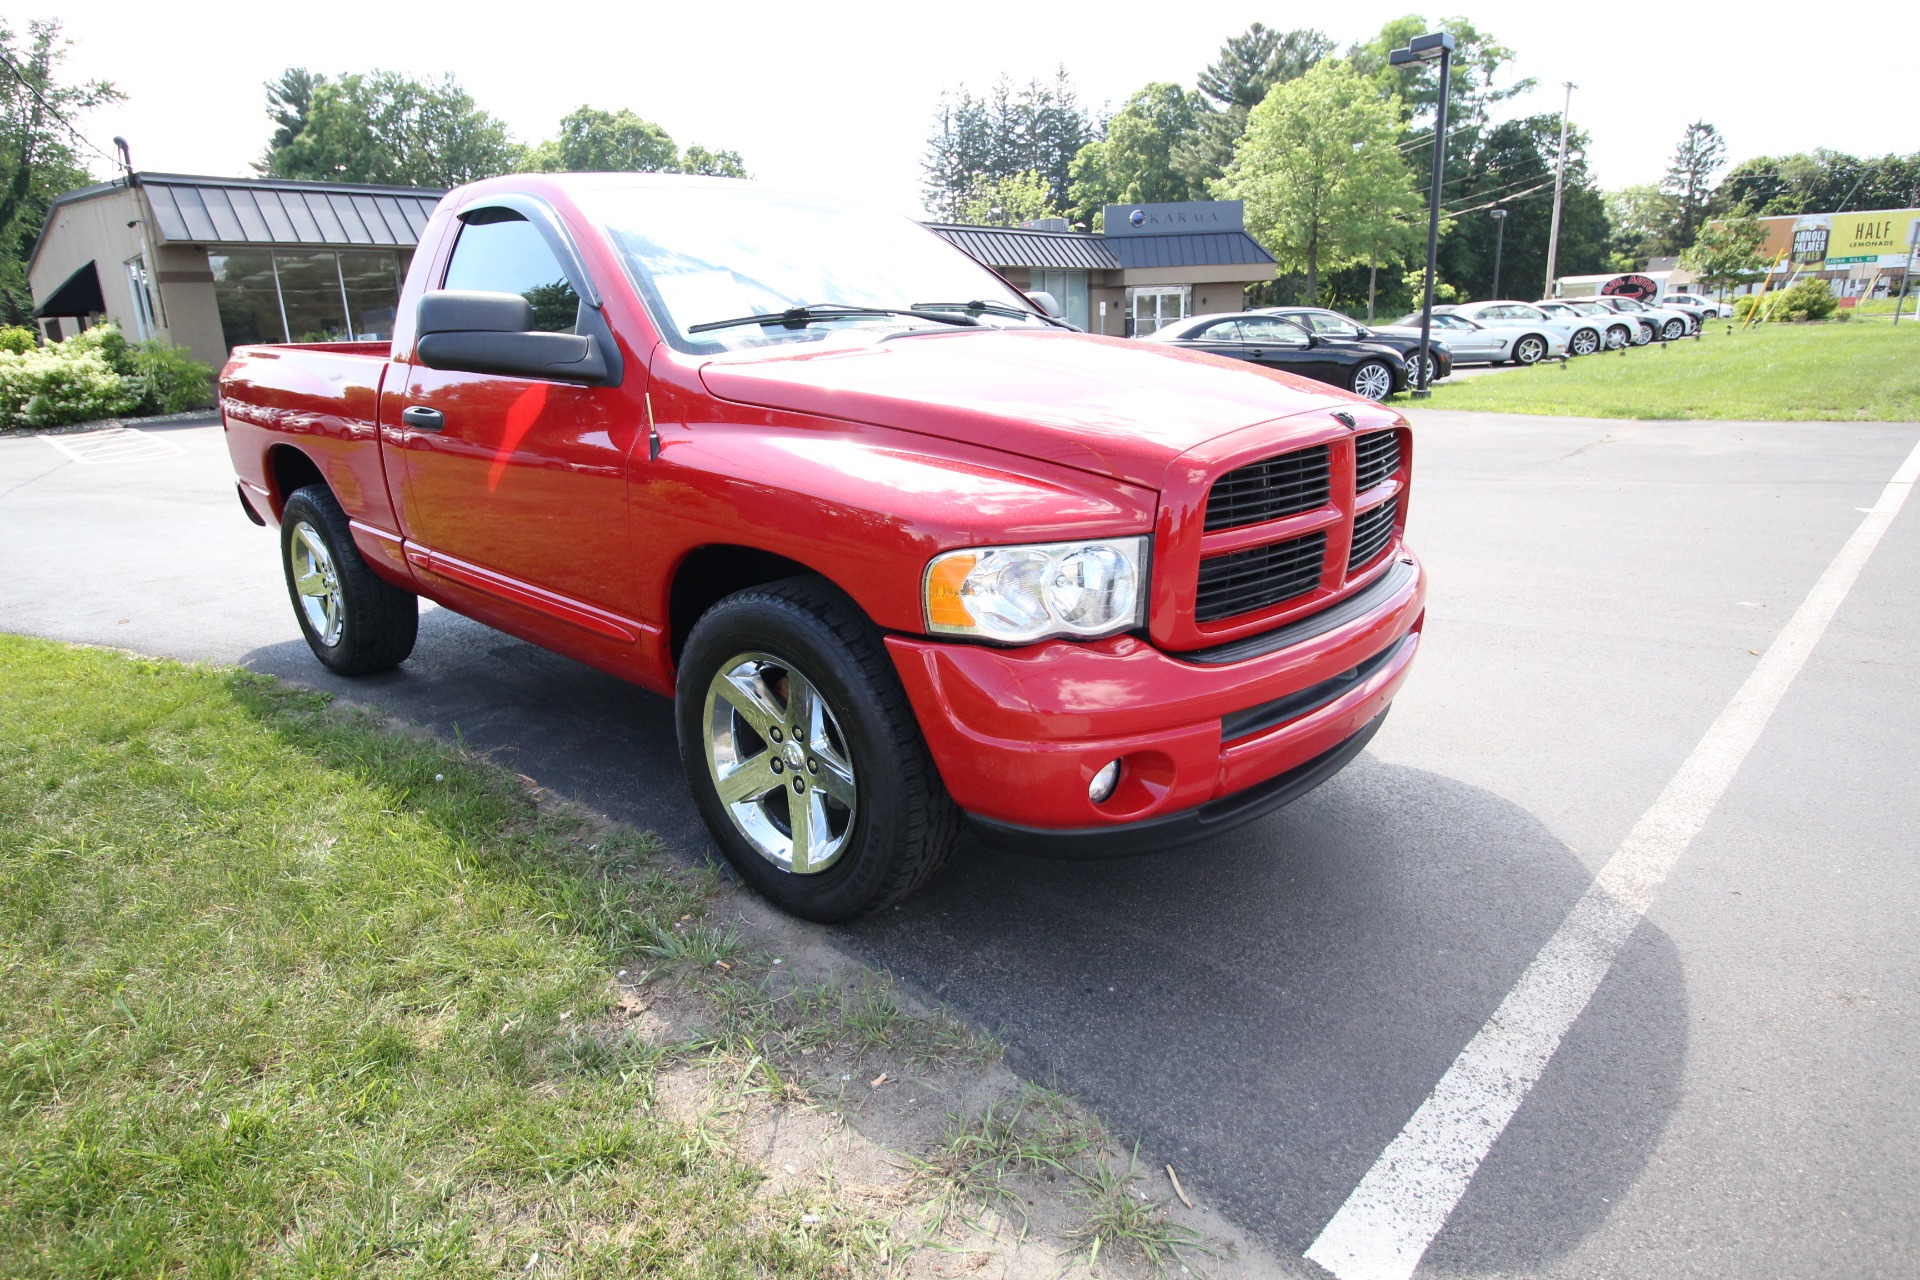 Used 2004 Flame Red Dodge Ram 1500 SLT 2WD | Albany, NY